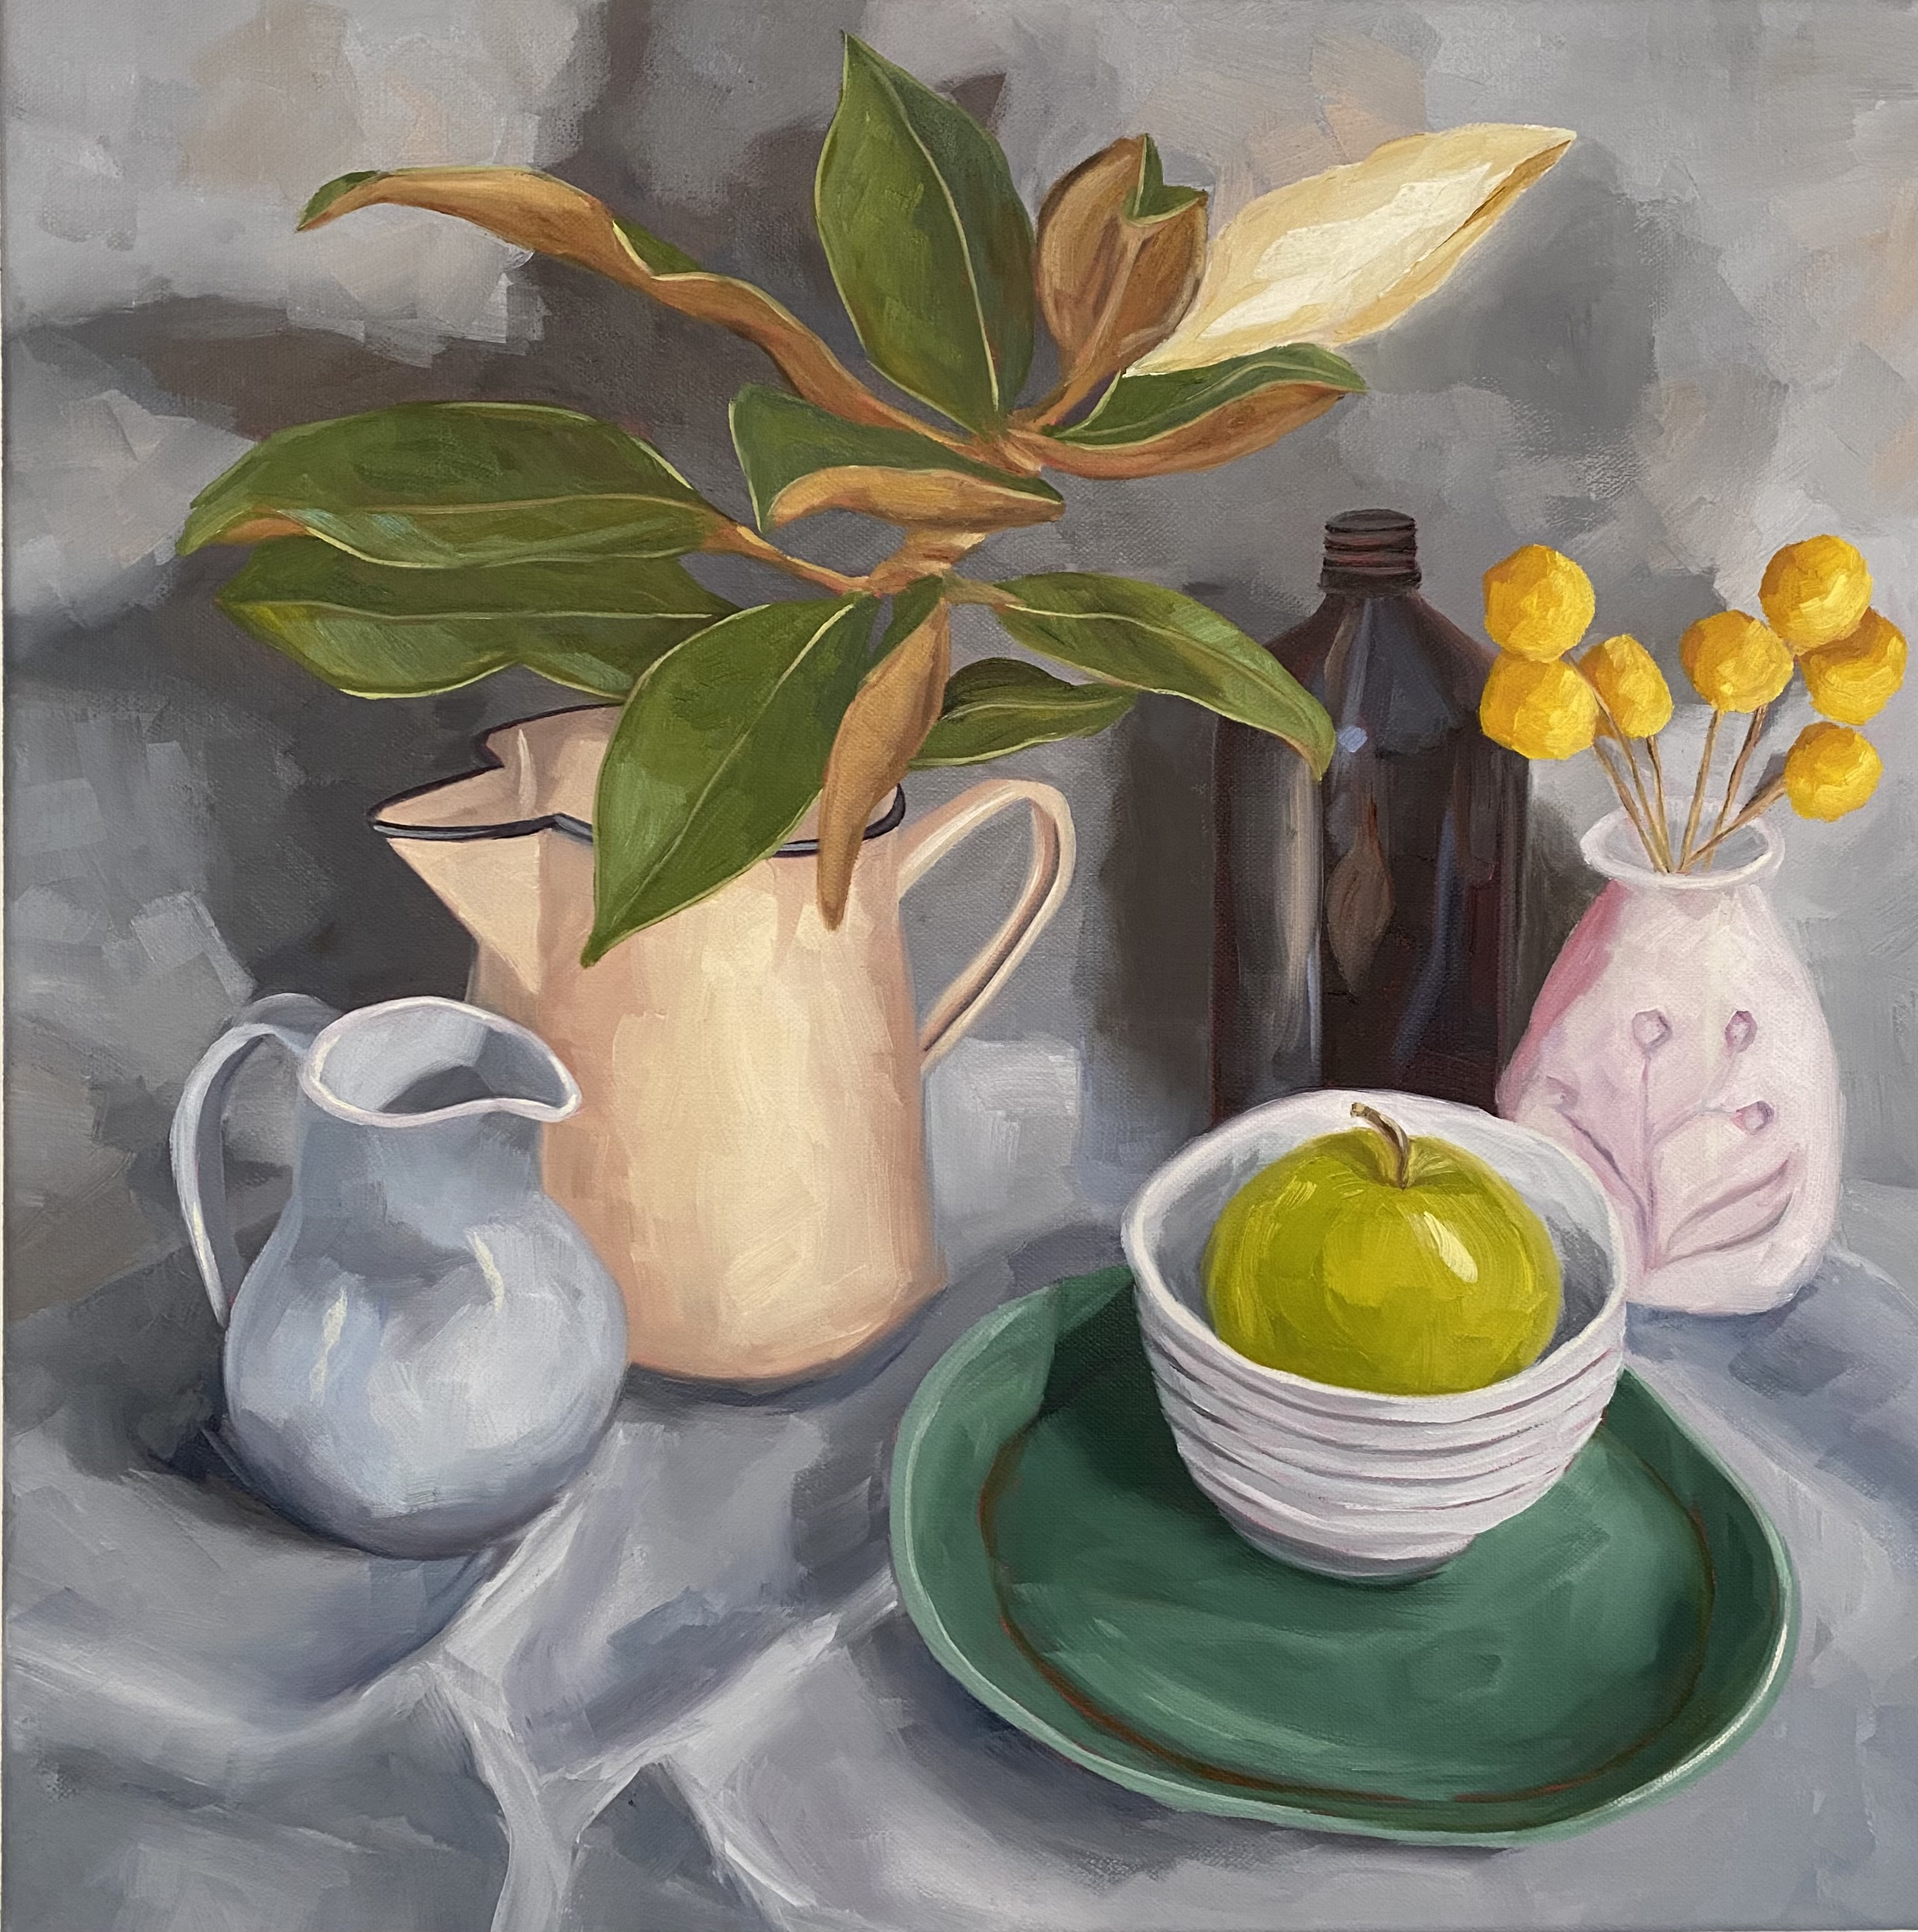 Magnolia with One Green Apple by Amanda Ogilby | Lethbridge 20000 2022 Finalists | Lethbridge Gallery